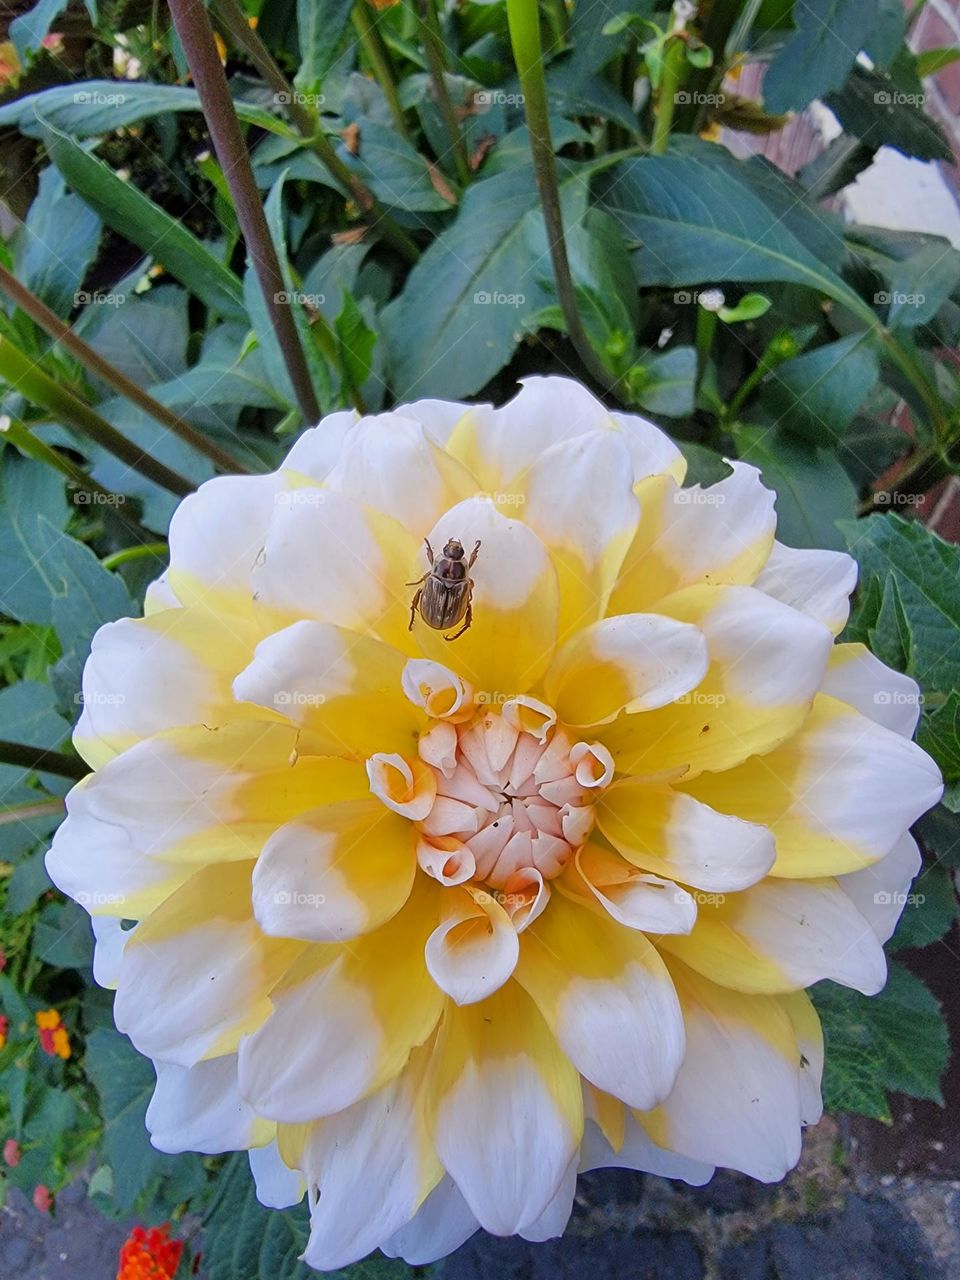 Yellow and White Fluffy Flower with a Beetle on the Petals